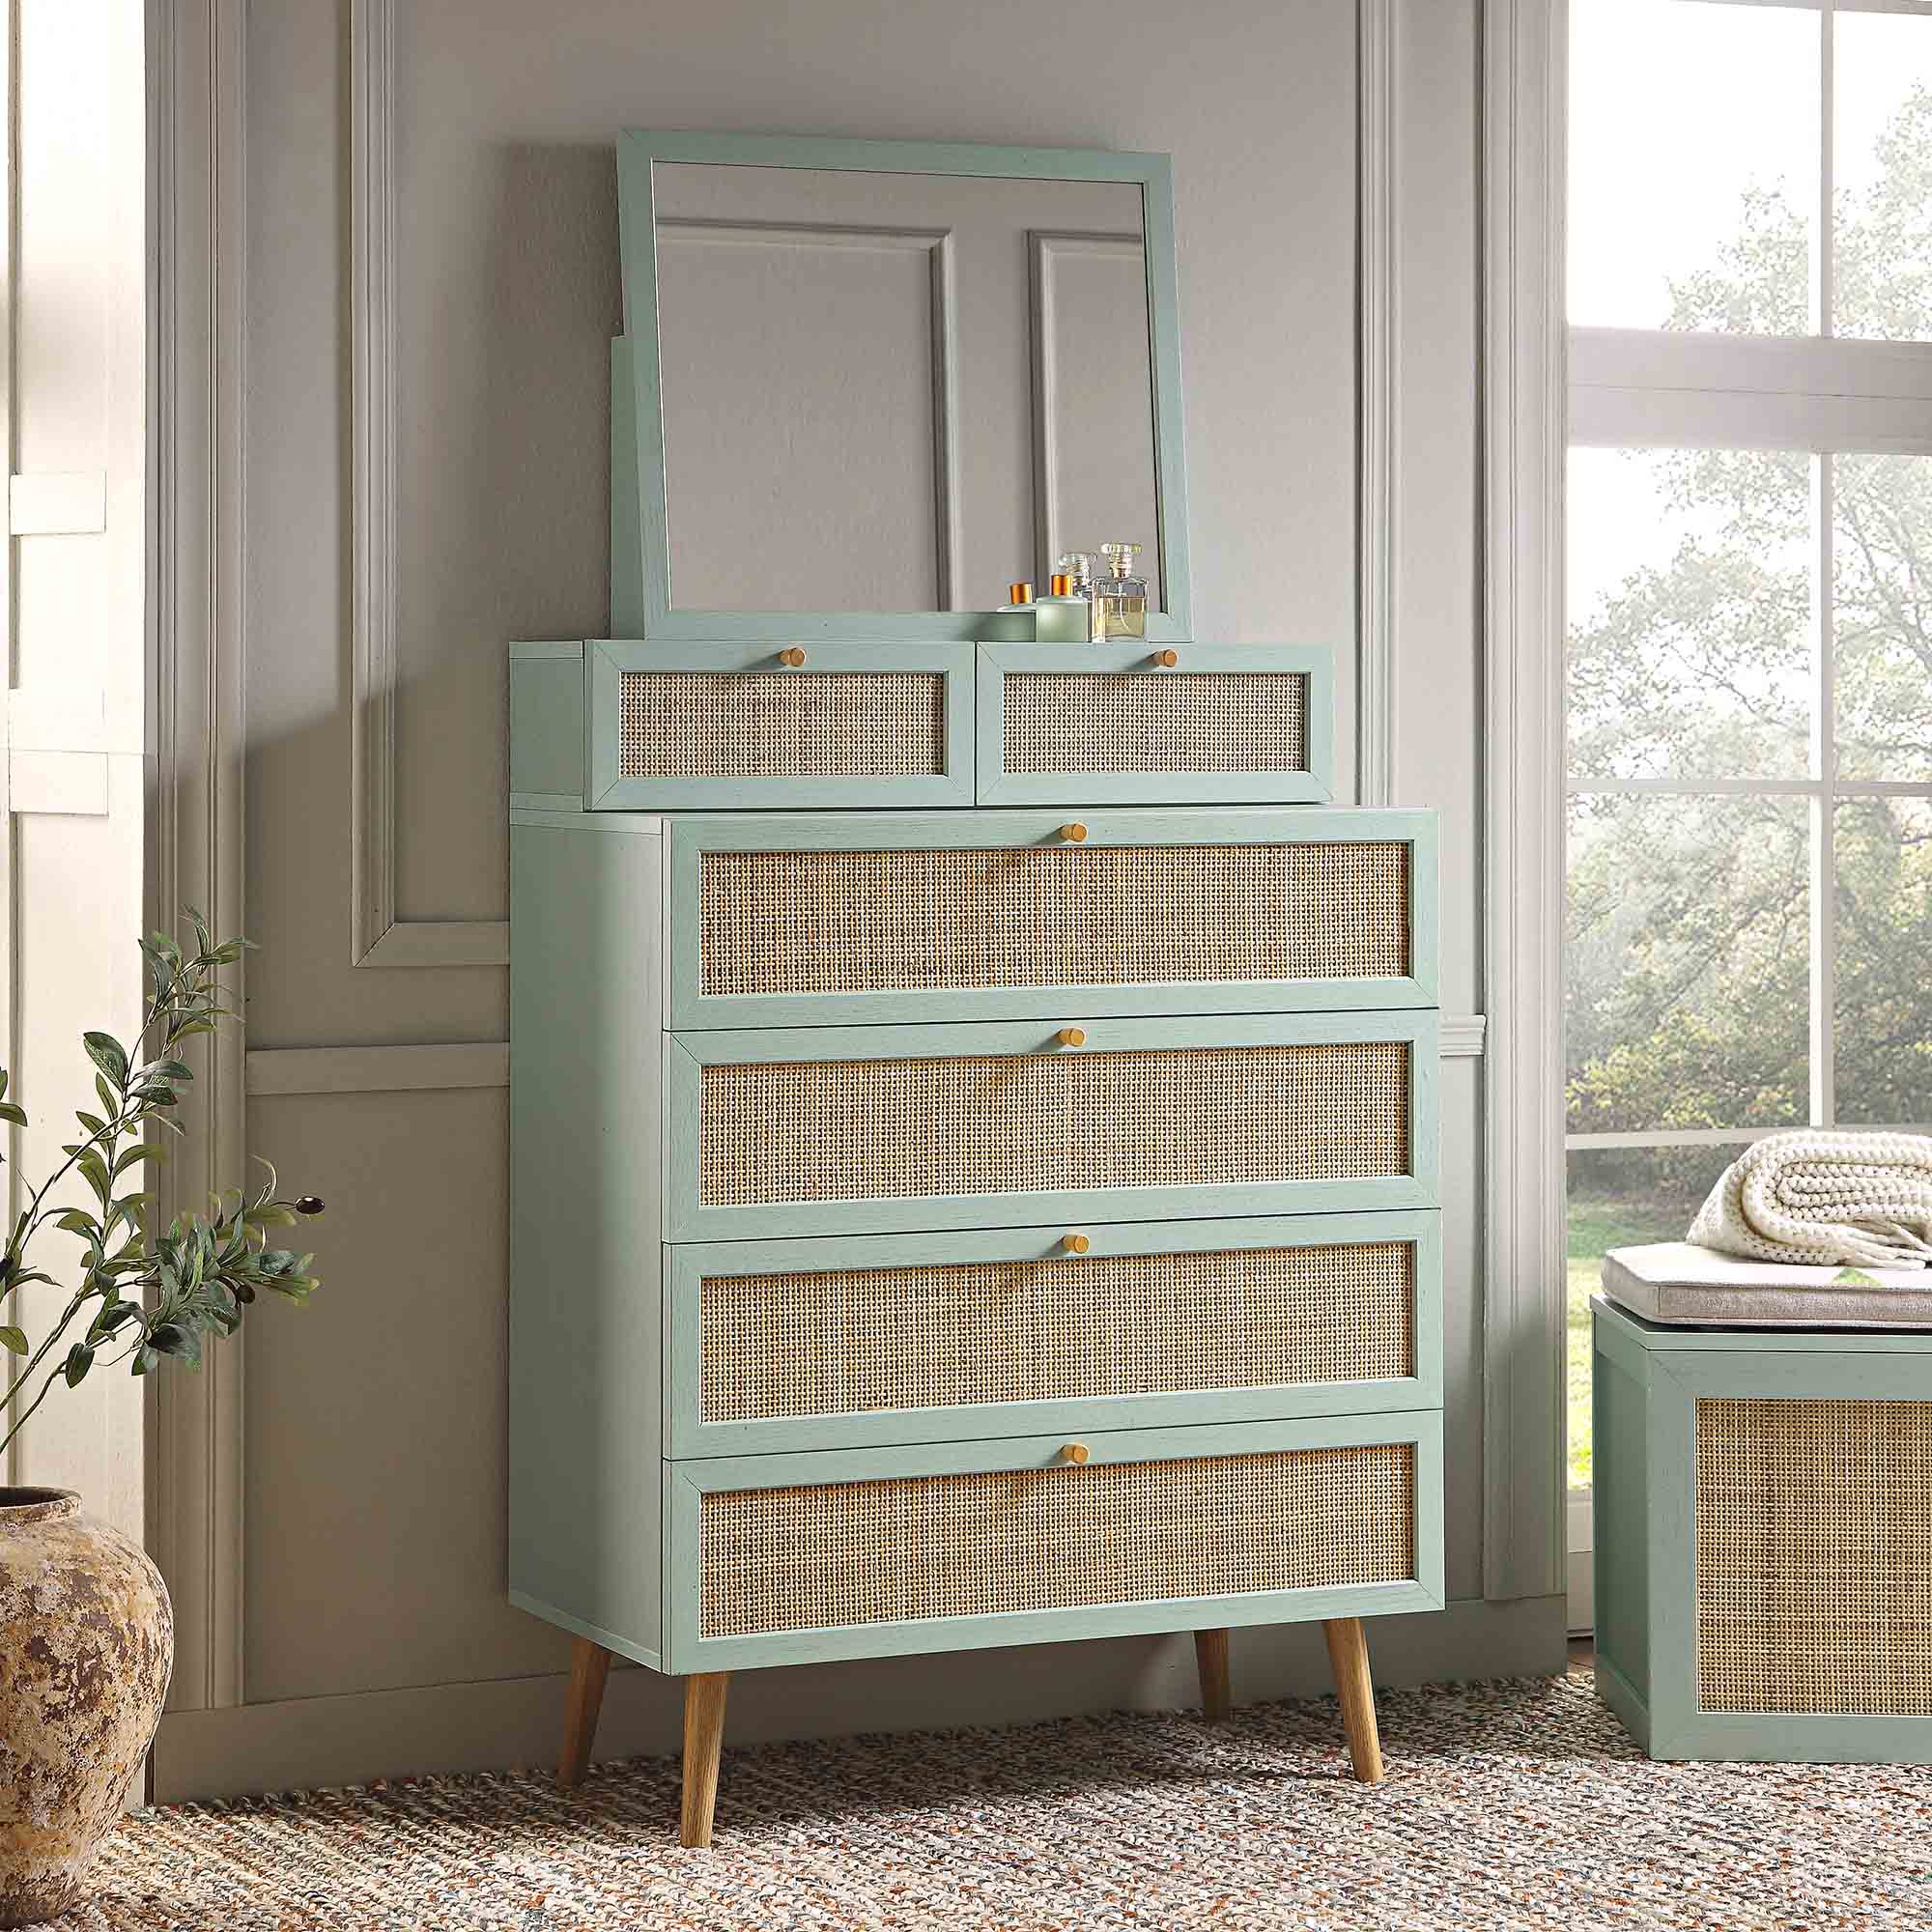 Frances Woven Rattan Tall Vanity Chest with Mirror, Mint